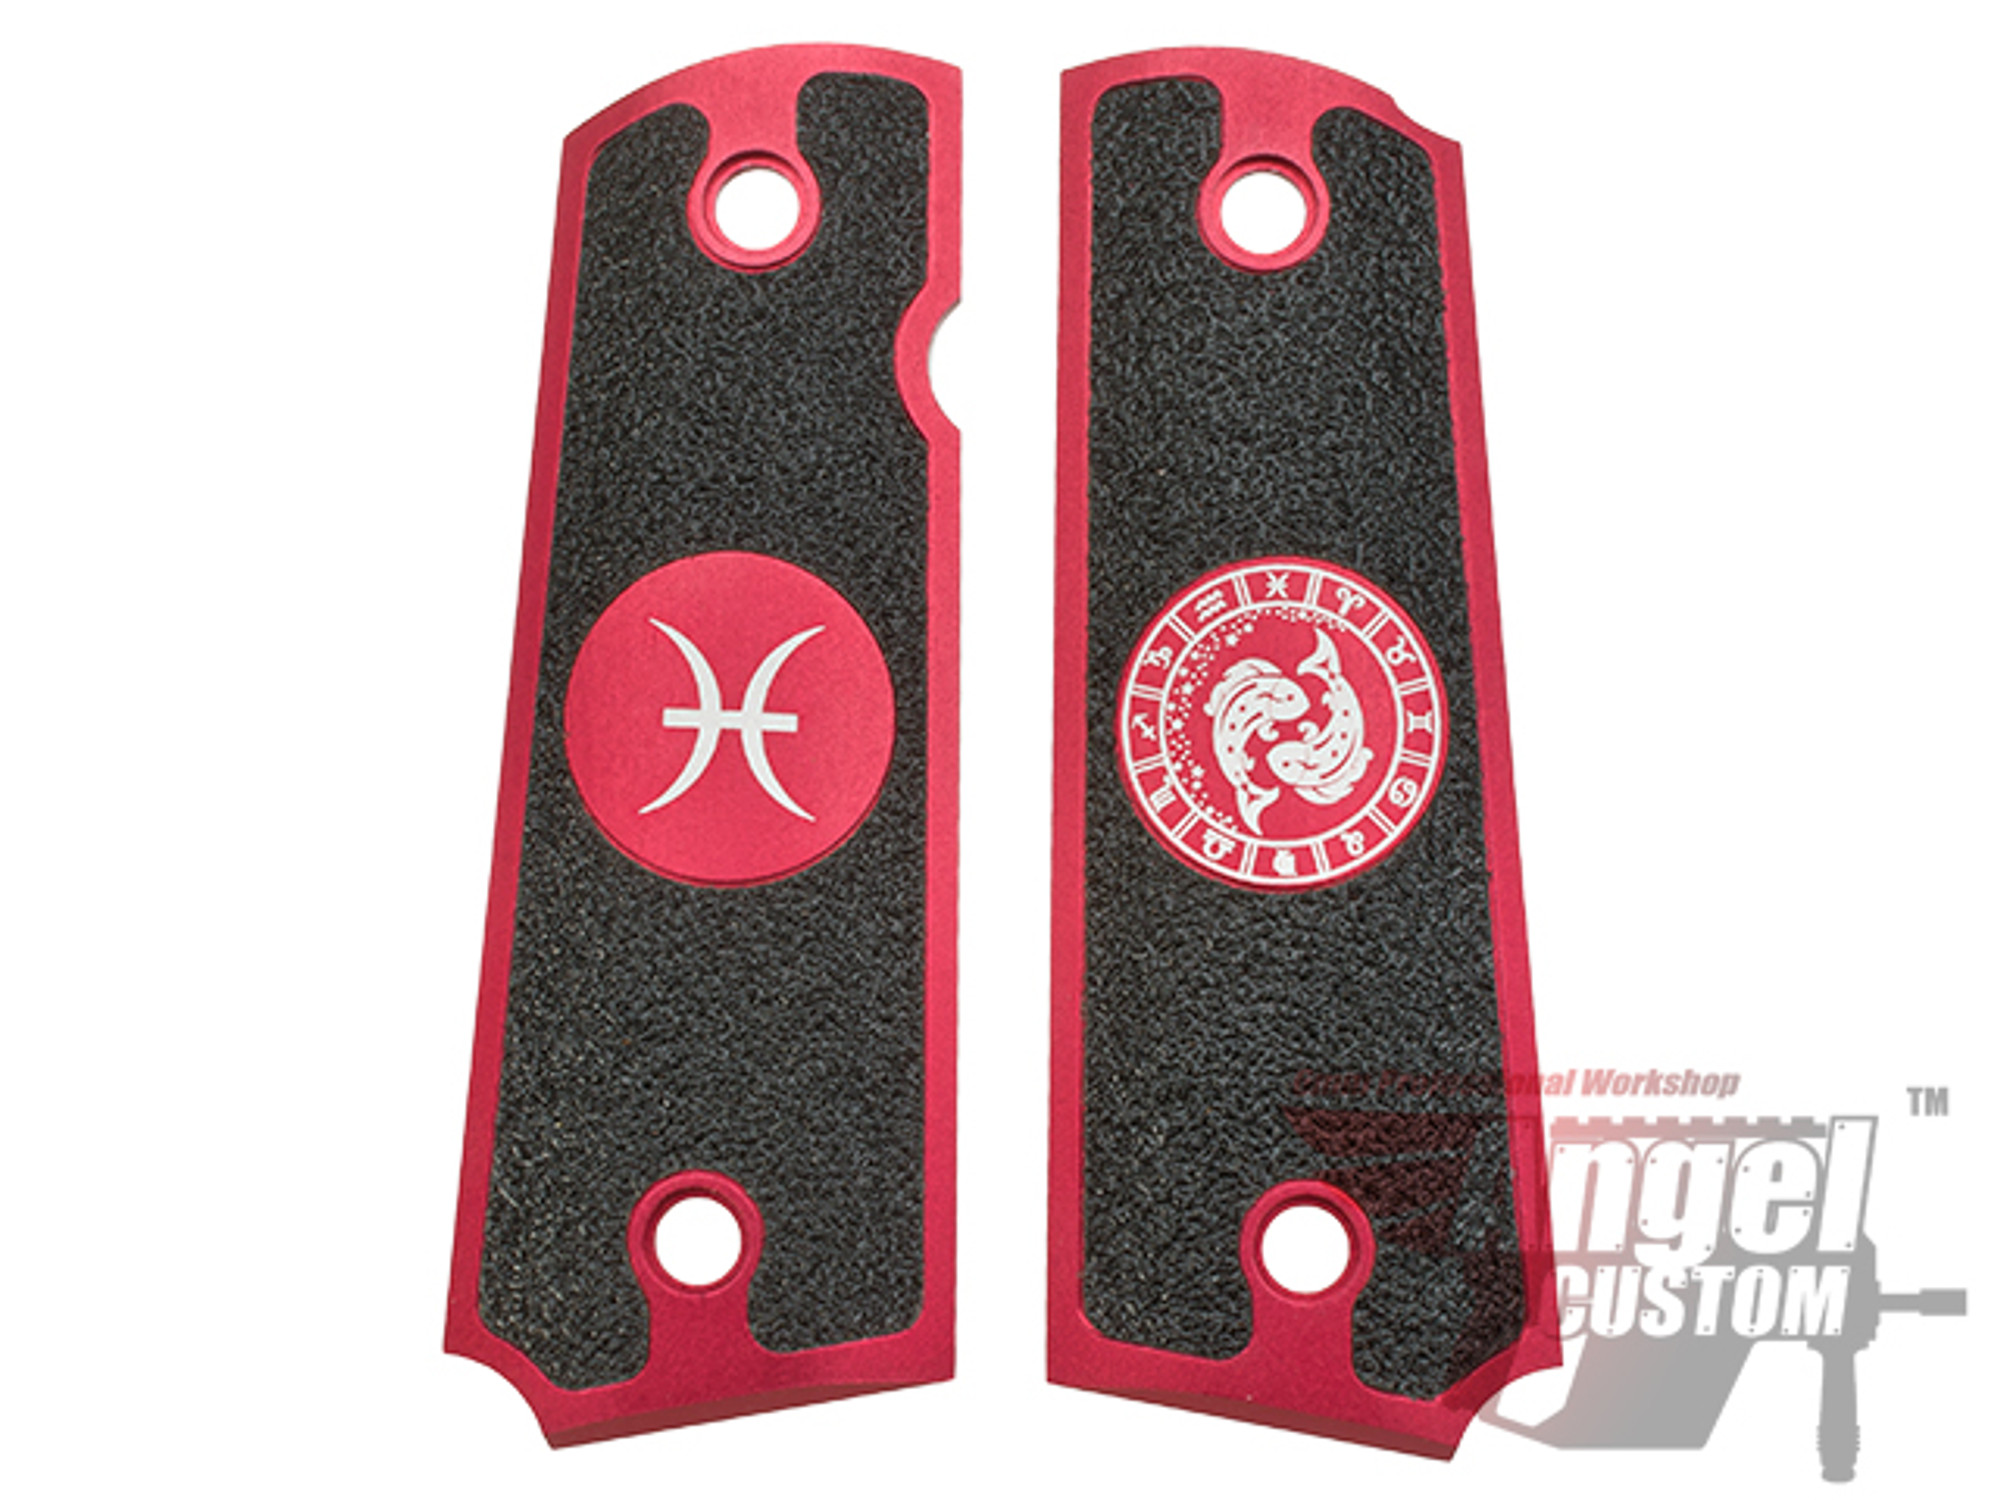 Angel Custom CNC Machined Tac-Glove "Zodiac" Grips for Tokyo Marui/KWA/Western Arms 1911 Series Airsoft Pistols - Pisces (Red)